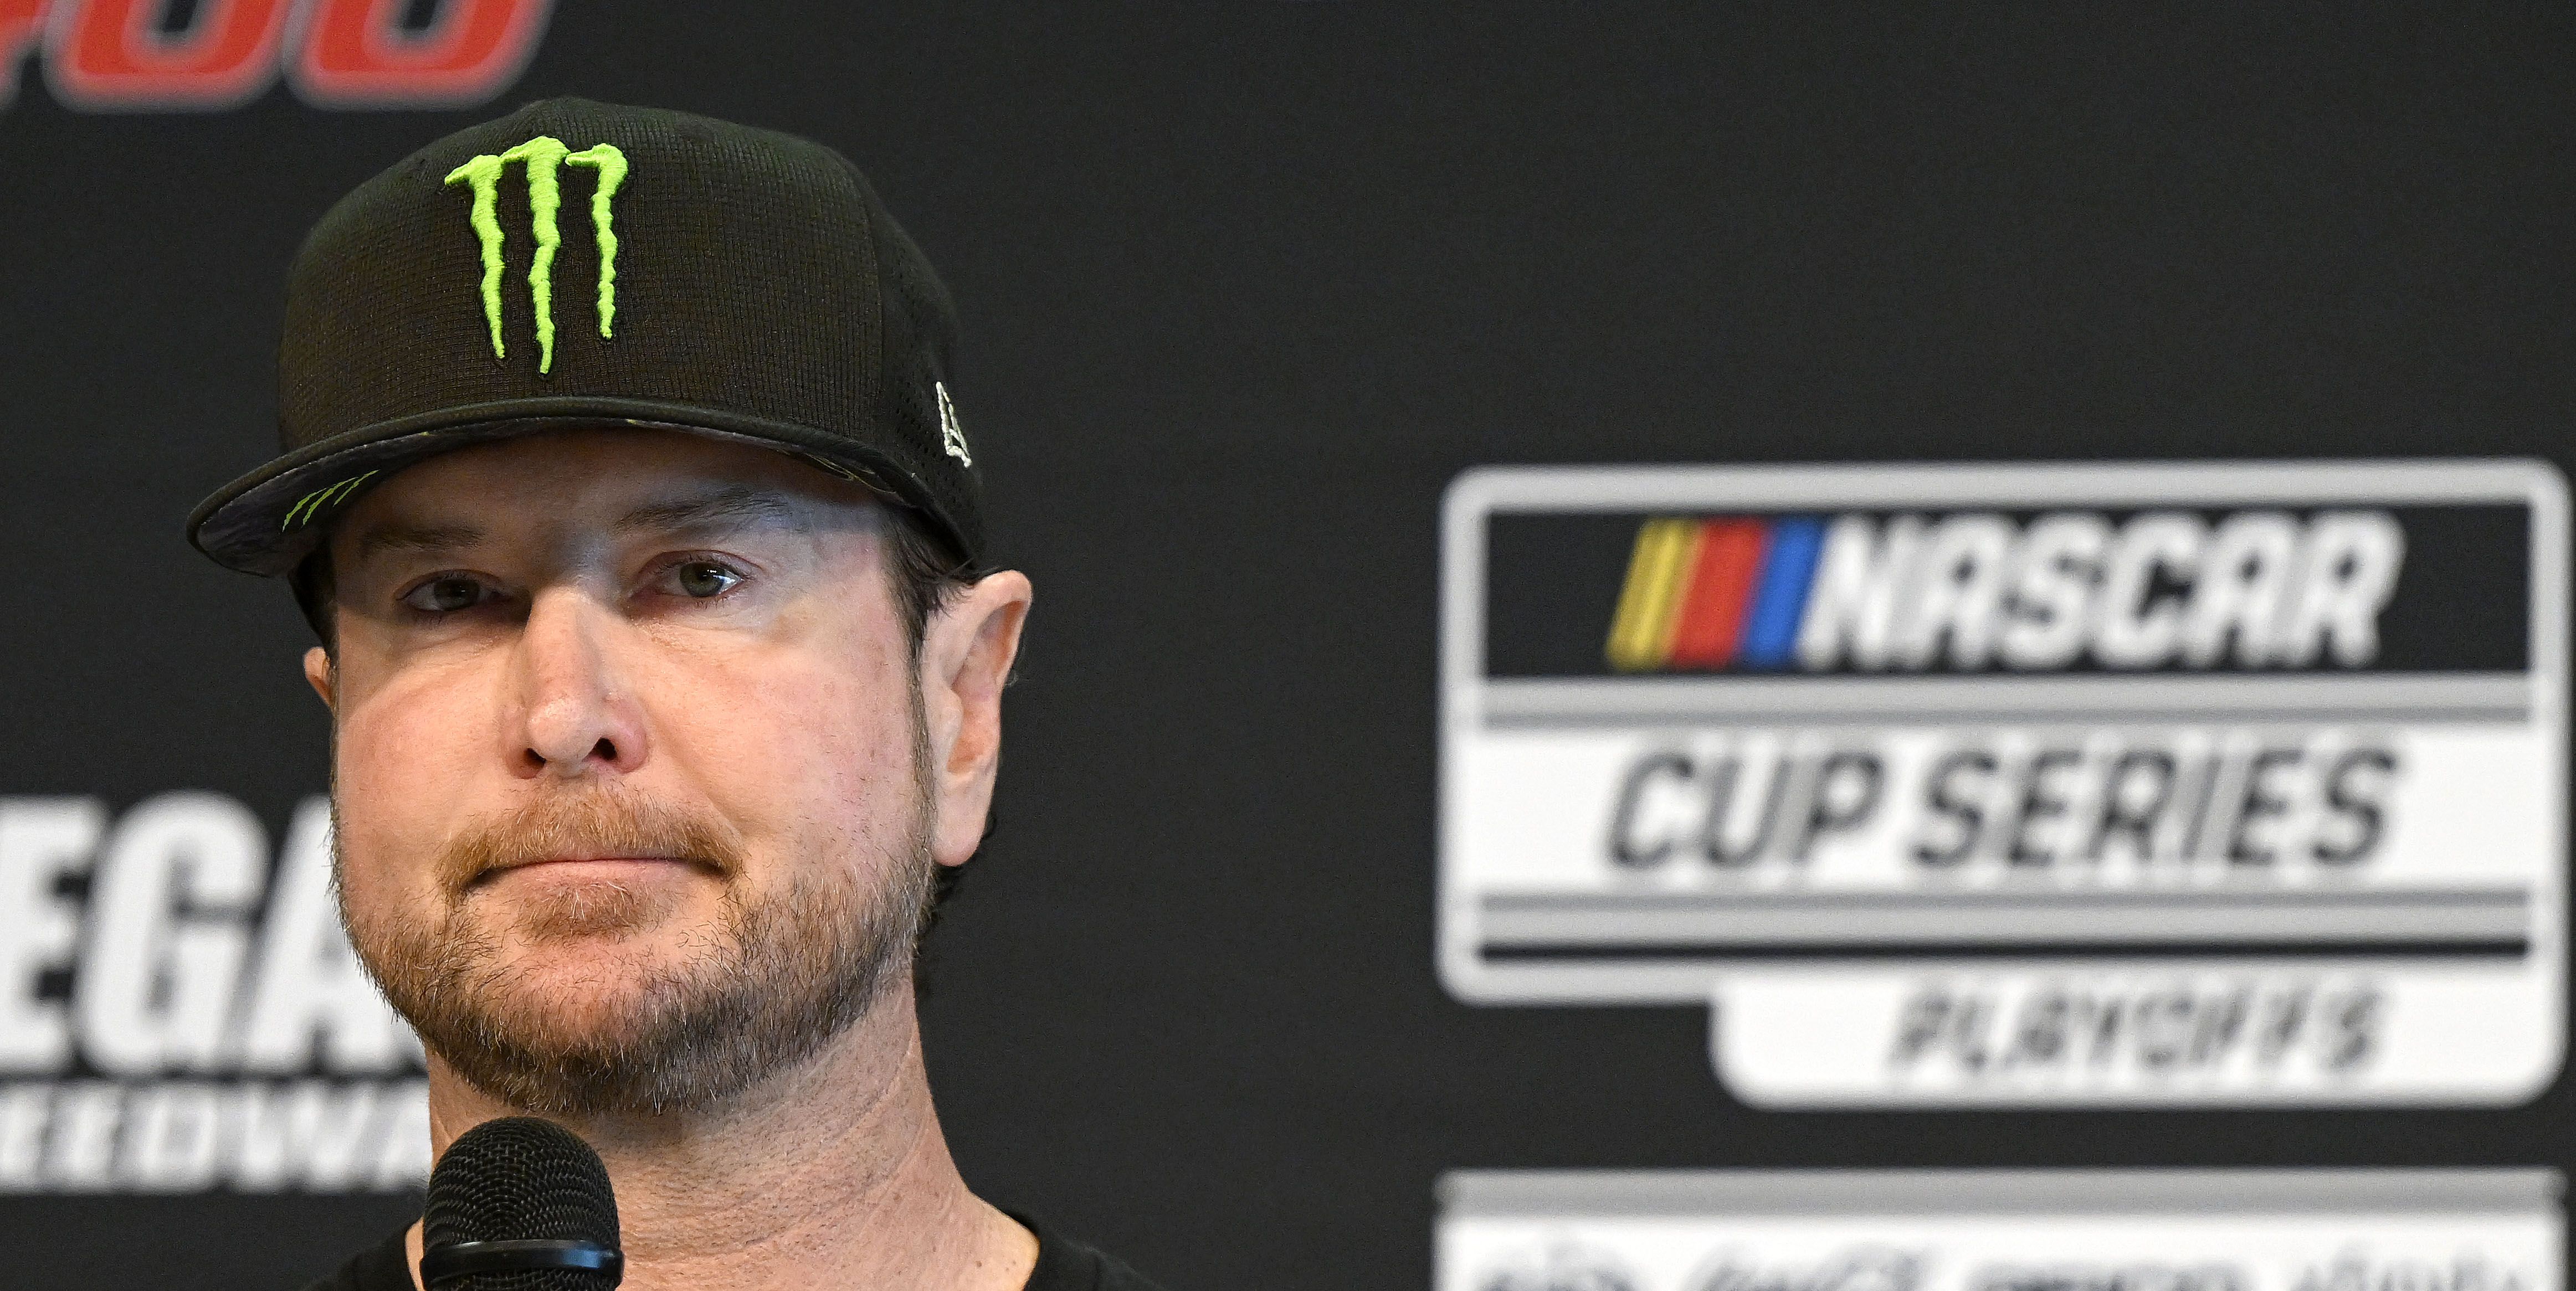 NASCAR Champ Kurt Busch's Career Filled with Highs and Lows